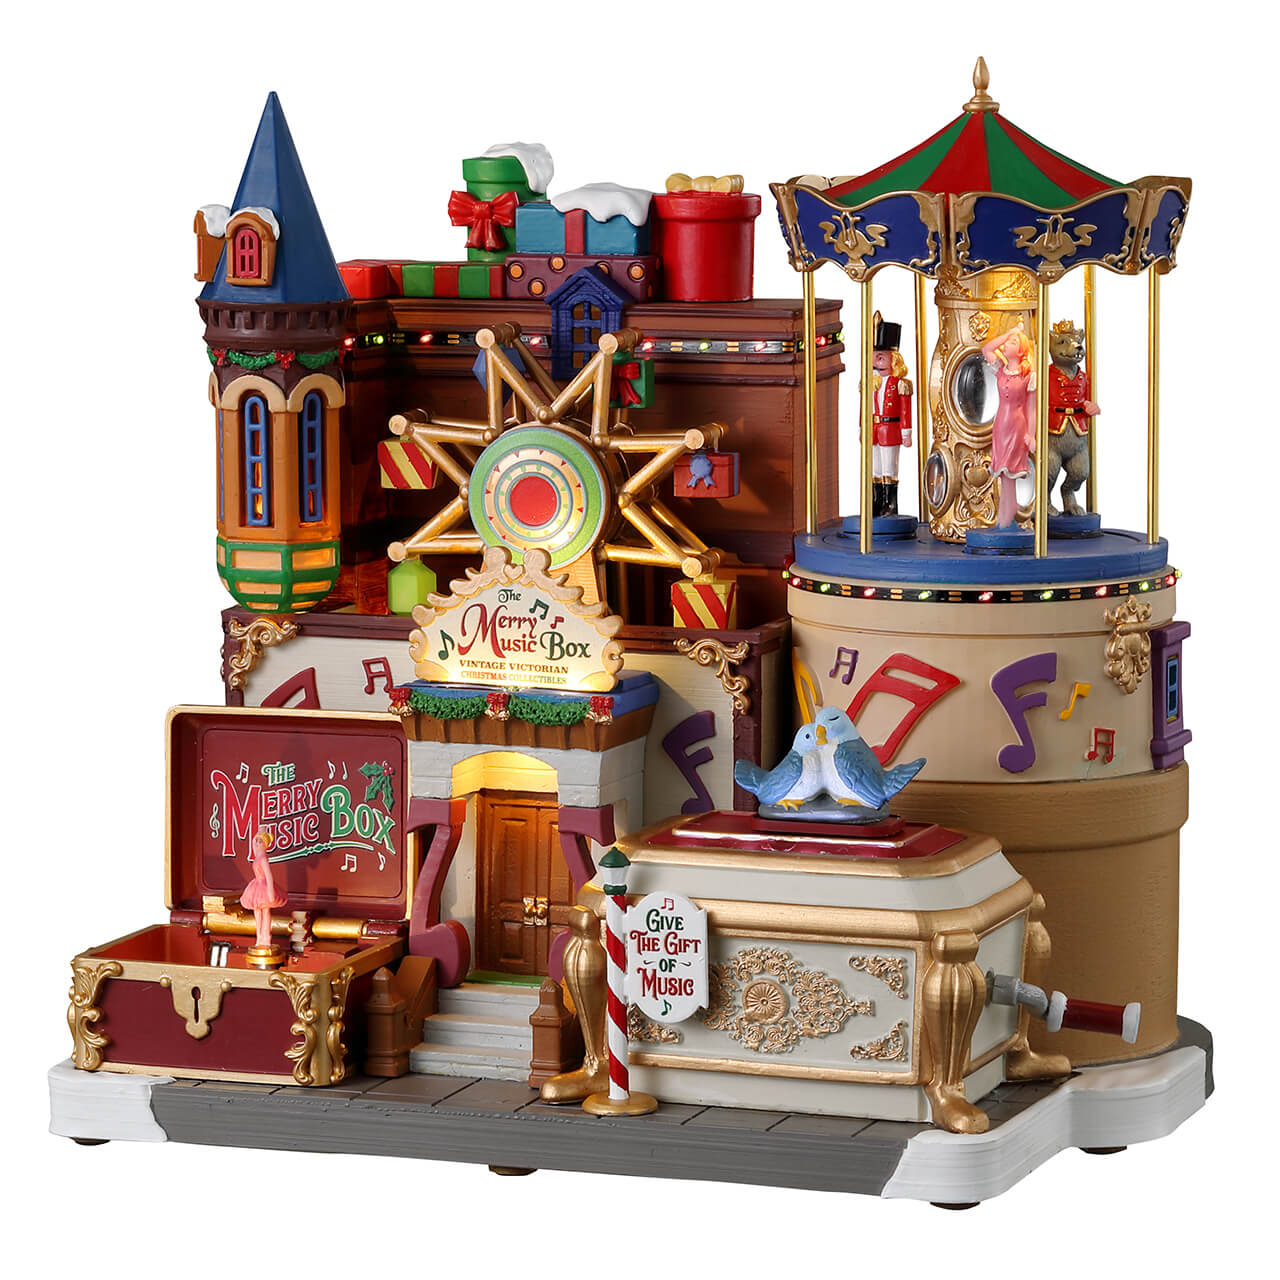 Lemax 35021 The Merry Music Box